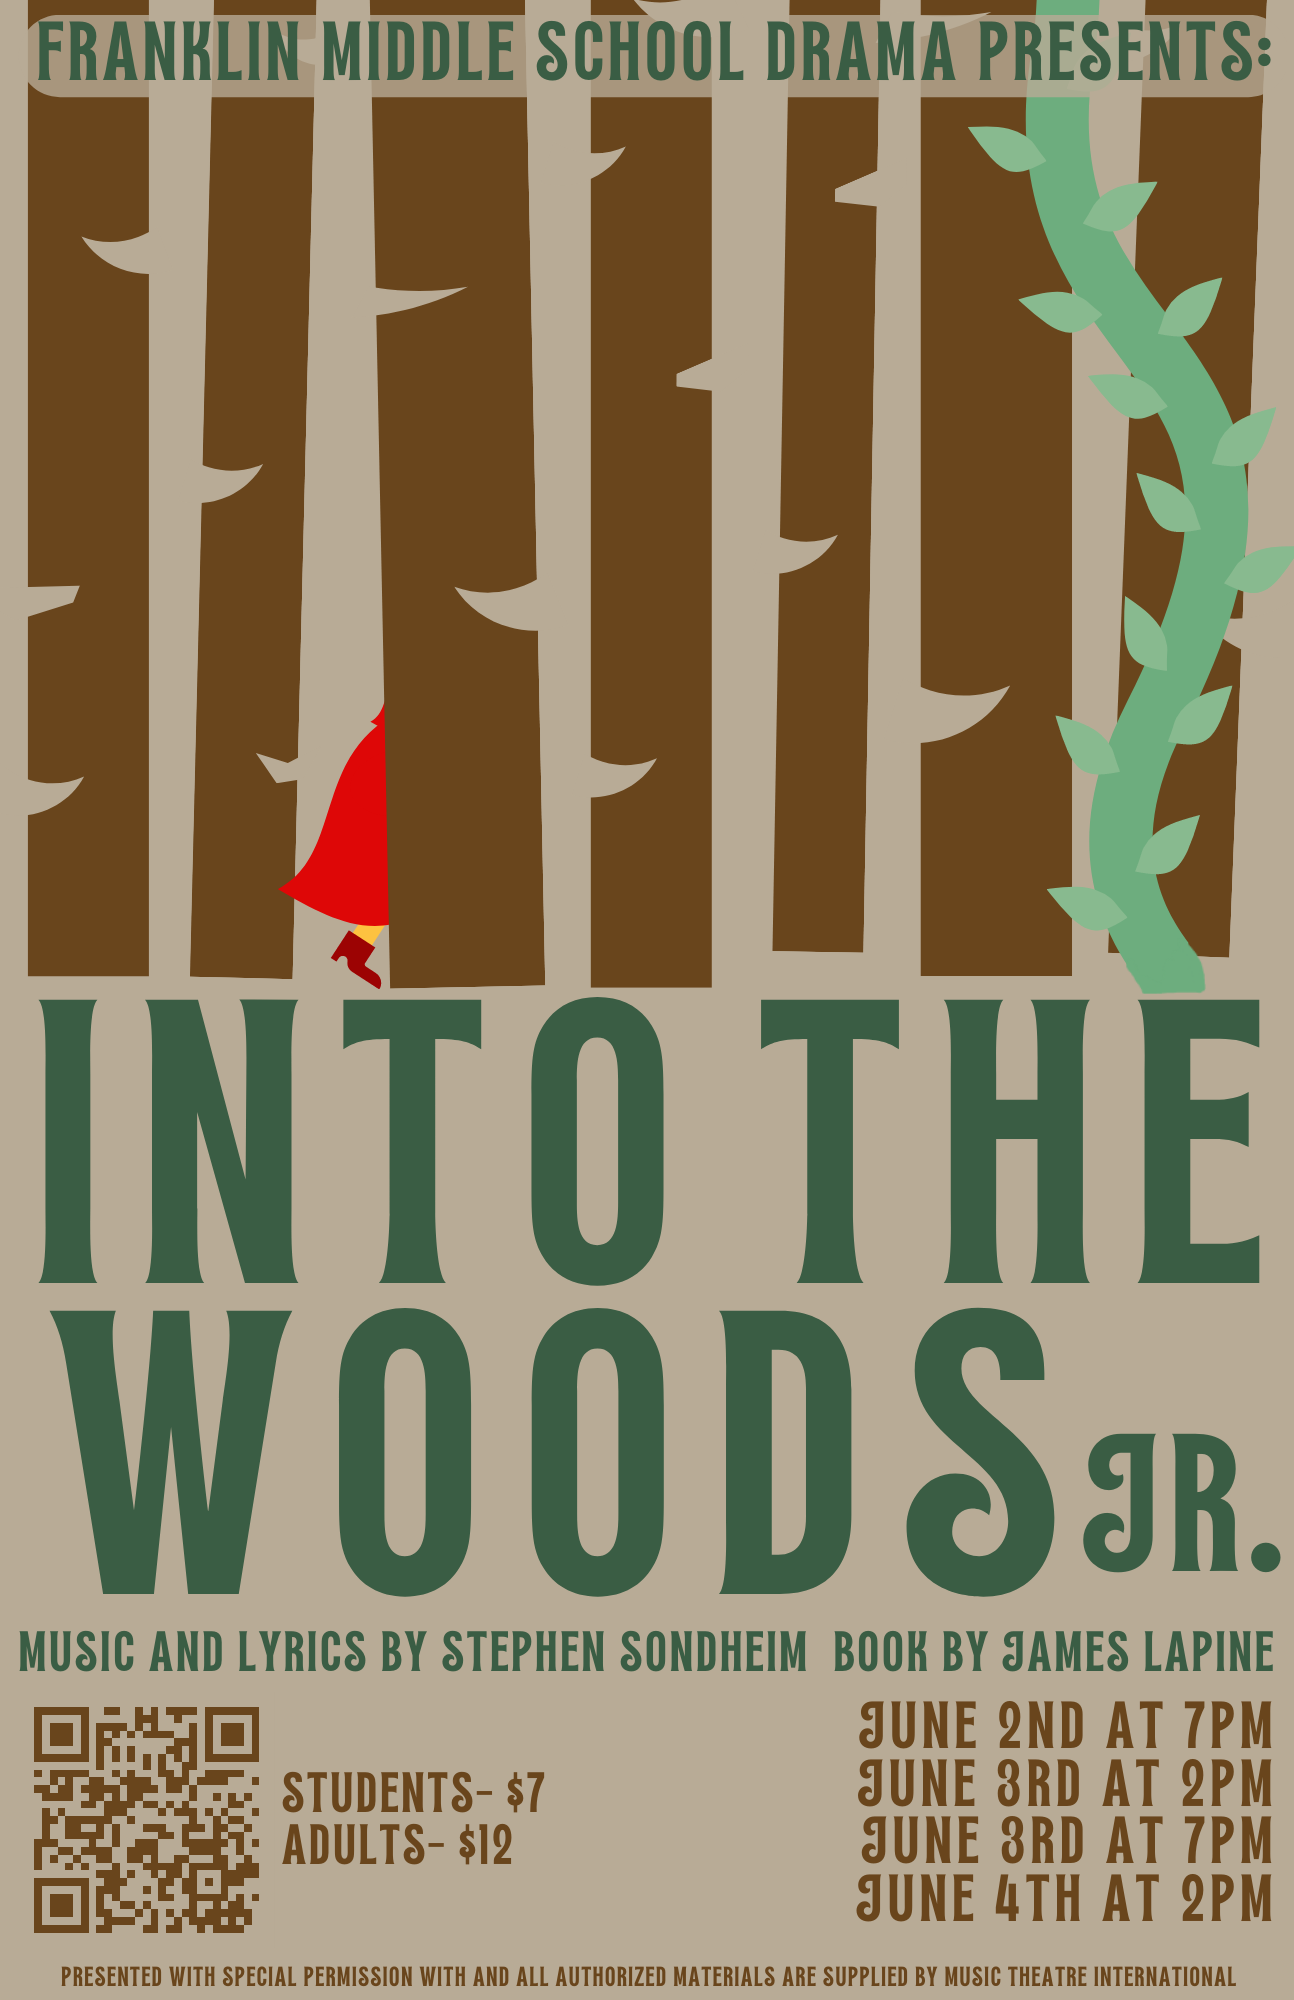 Franklin Middle School Drama Presents: Into the Woods Jr. Music and Lyrics by Stephen Sondheim, Book by James Lapine. Students- $7, Adults -$12. June 2nd at 7pm June 3rd at 2pm June 3rd at 7pm June 4th at 2pm. Presented with special permission and all authorized materials are supplied by Music Theatre International